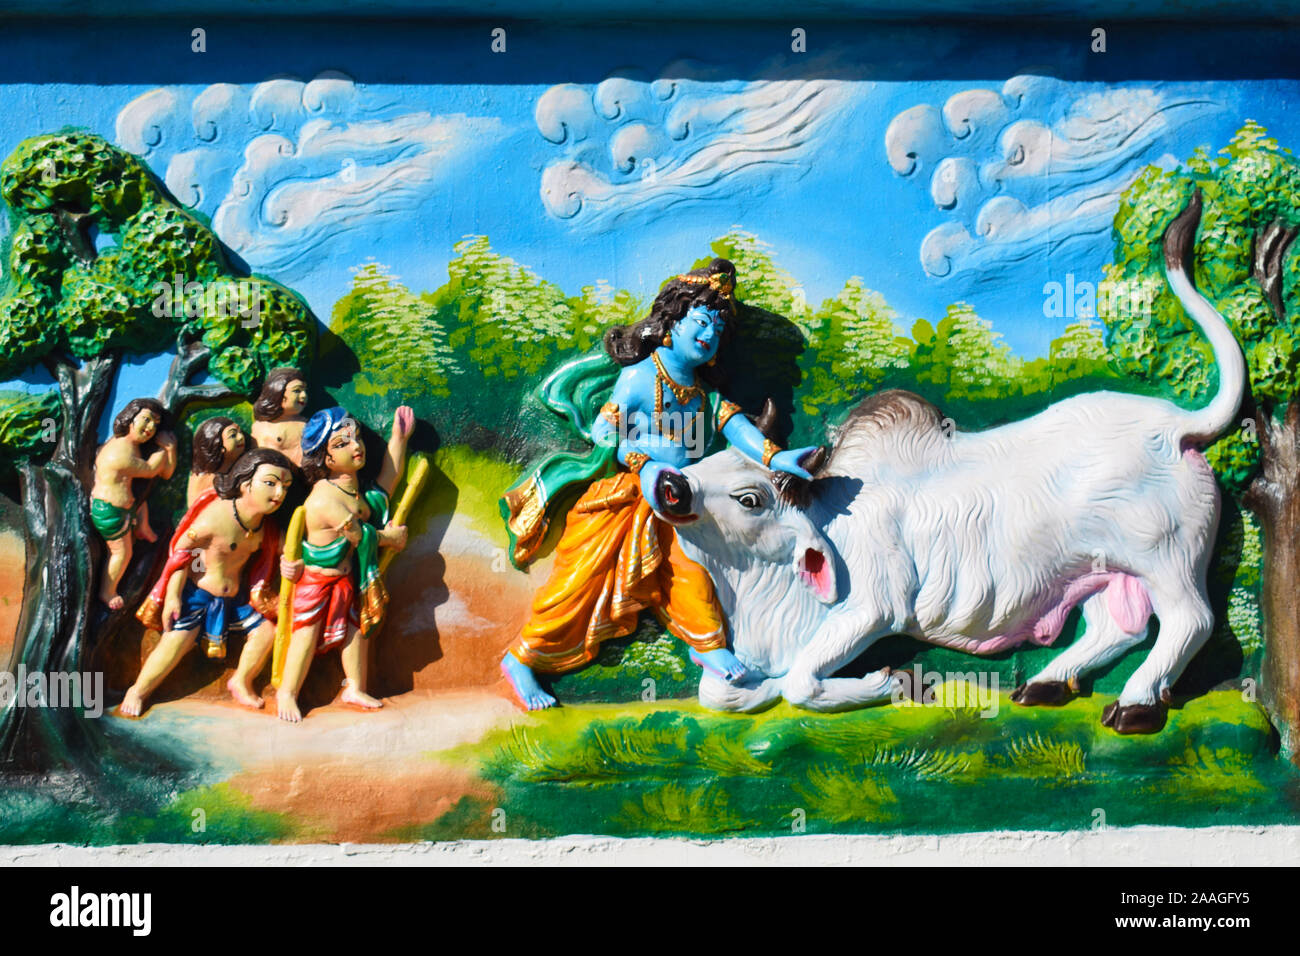 Demon in form of a cow attacked Krishna but killed in the ensuing Duel, Jagannath Temple, Dibrugarh, Assam, India Stock Photo